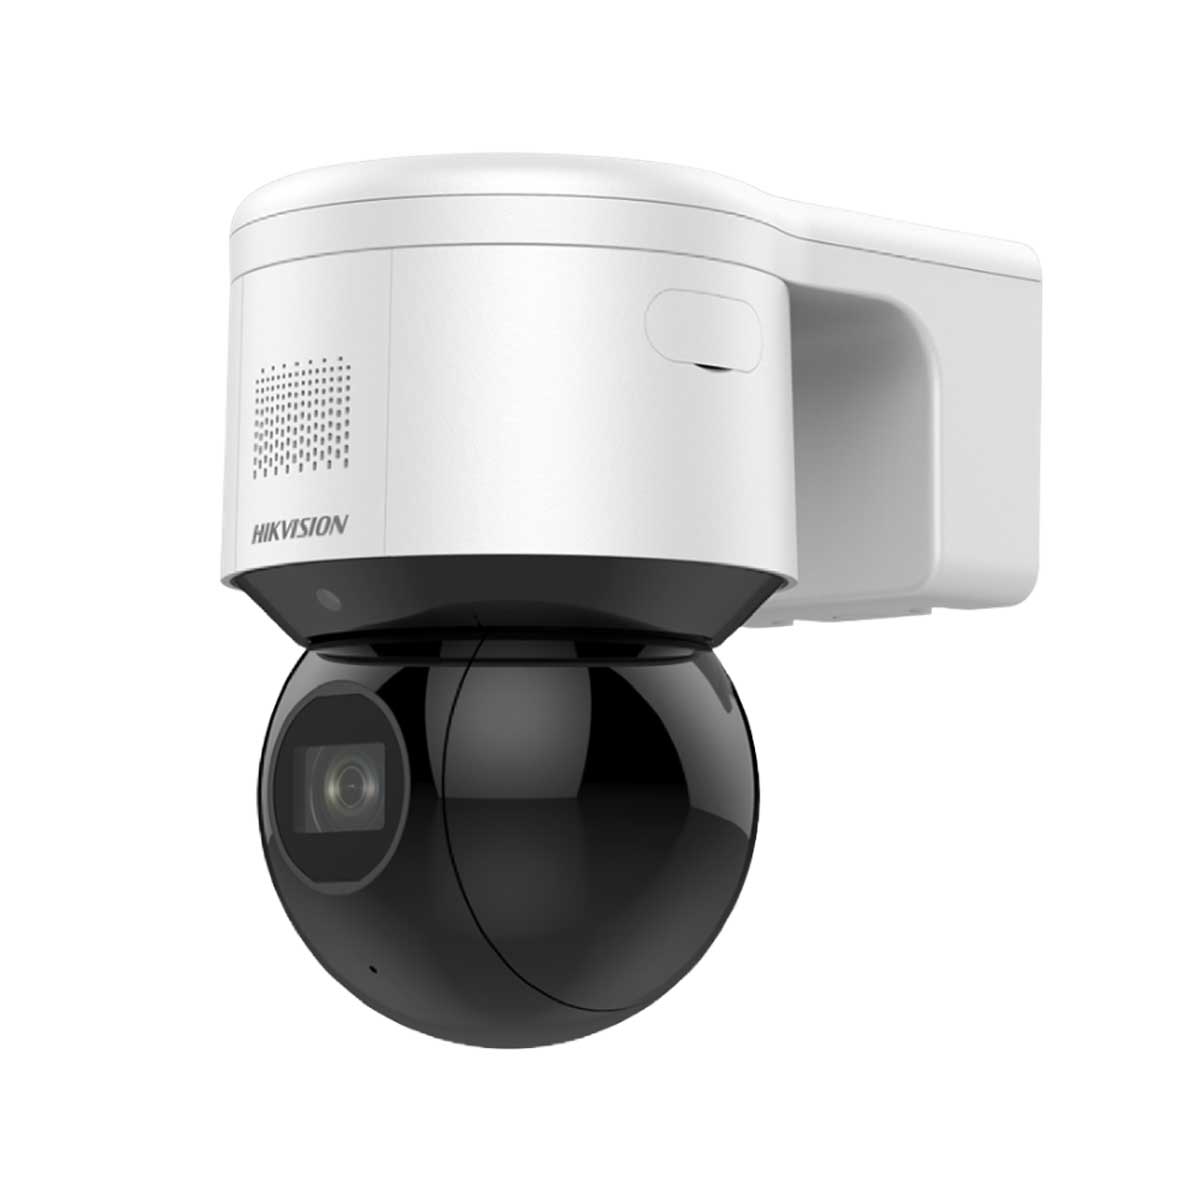 Camera IP Speed Dome Mini Hikvision DS-2DE3A404IW-DE(S6) 4MP,  zoom 4X, tÃ­ch há»£p mic vÃ  loa Ä‘Ã m thoáº¡i 2 chiá»�u